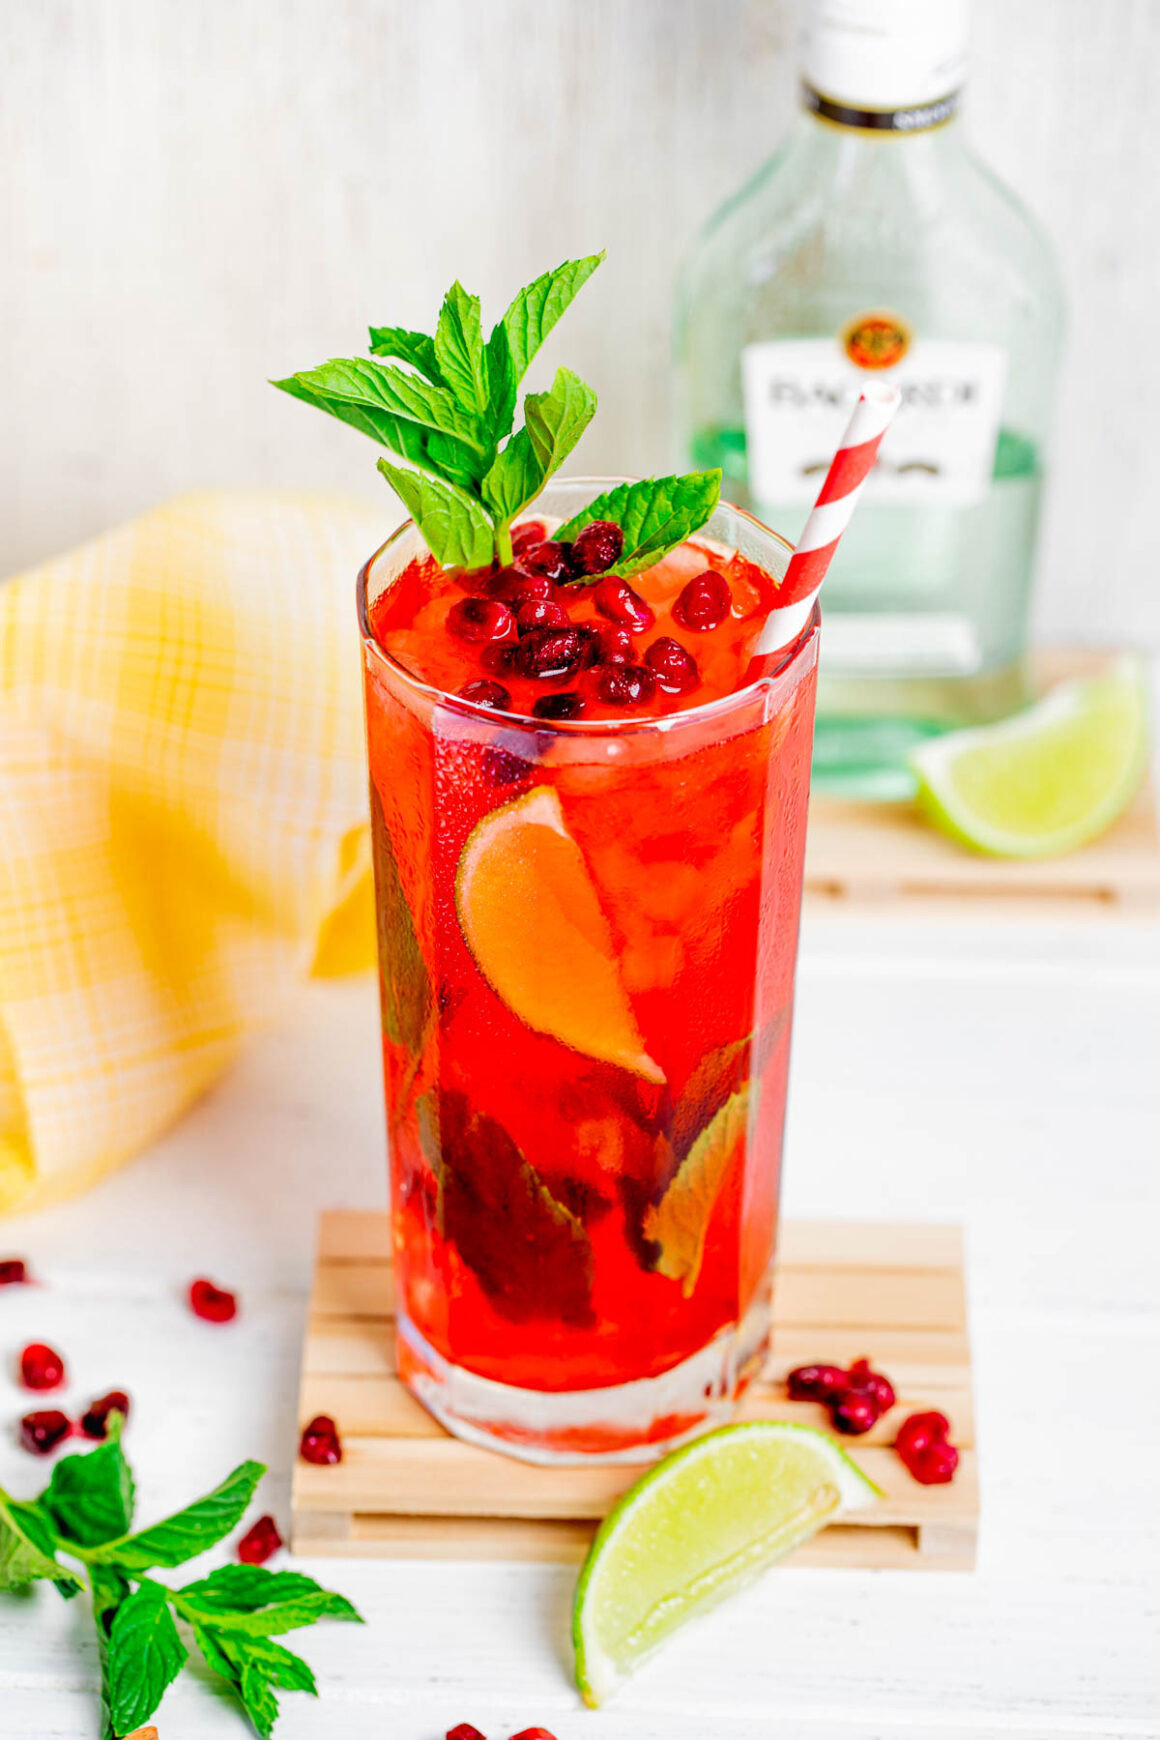 Pomegranate Mojito is a stunning twist recipe of the Classic Mojito, is colorful as well as refreshing, it’s the perfect cocktail for that special event with family and friends!

